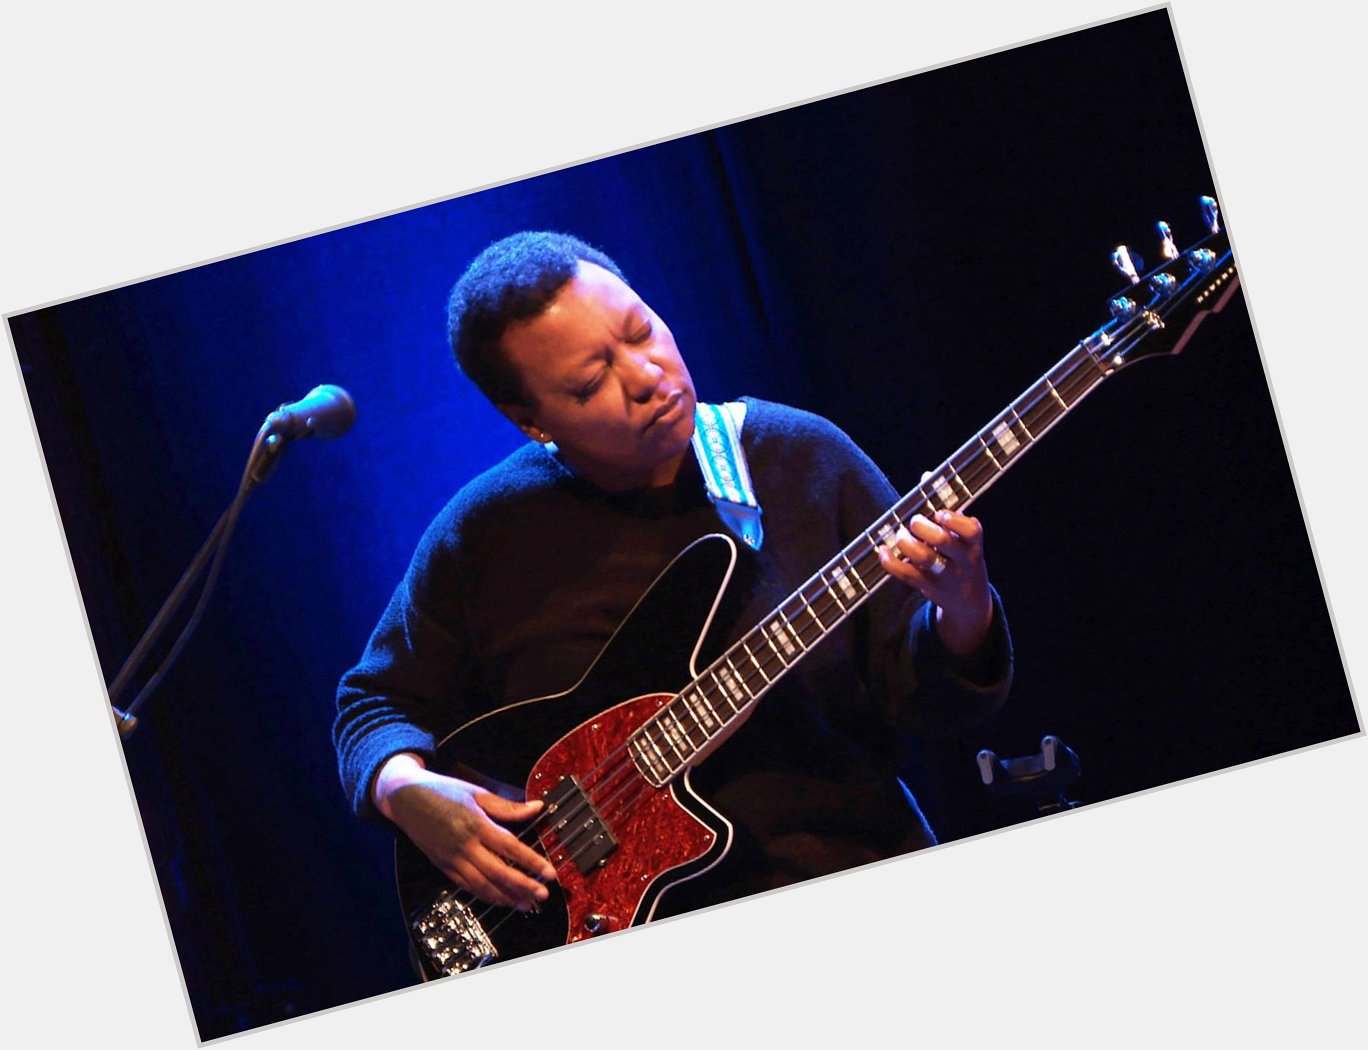 Happy Birthday to the one and only Meshell Ndegeocello! 